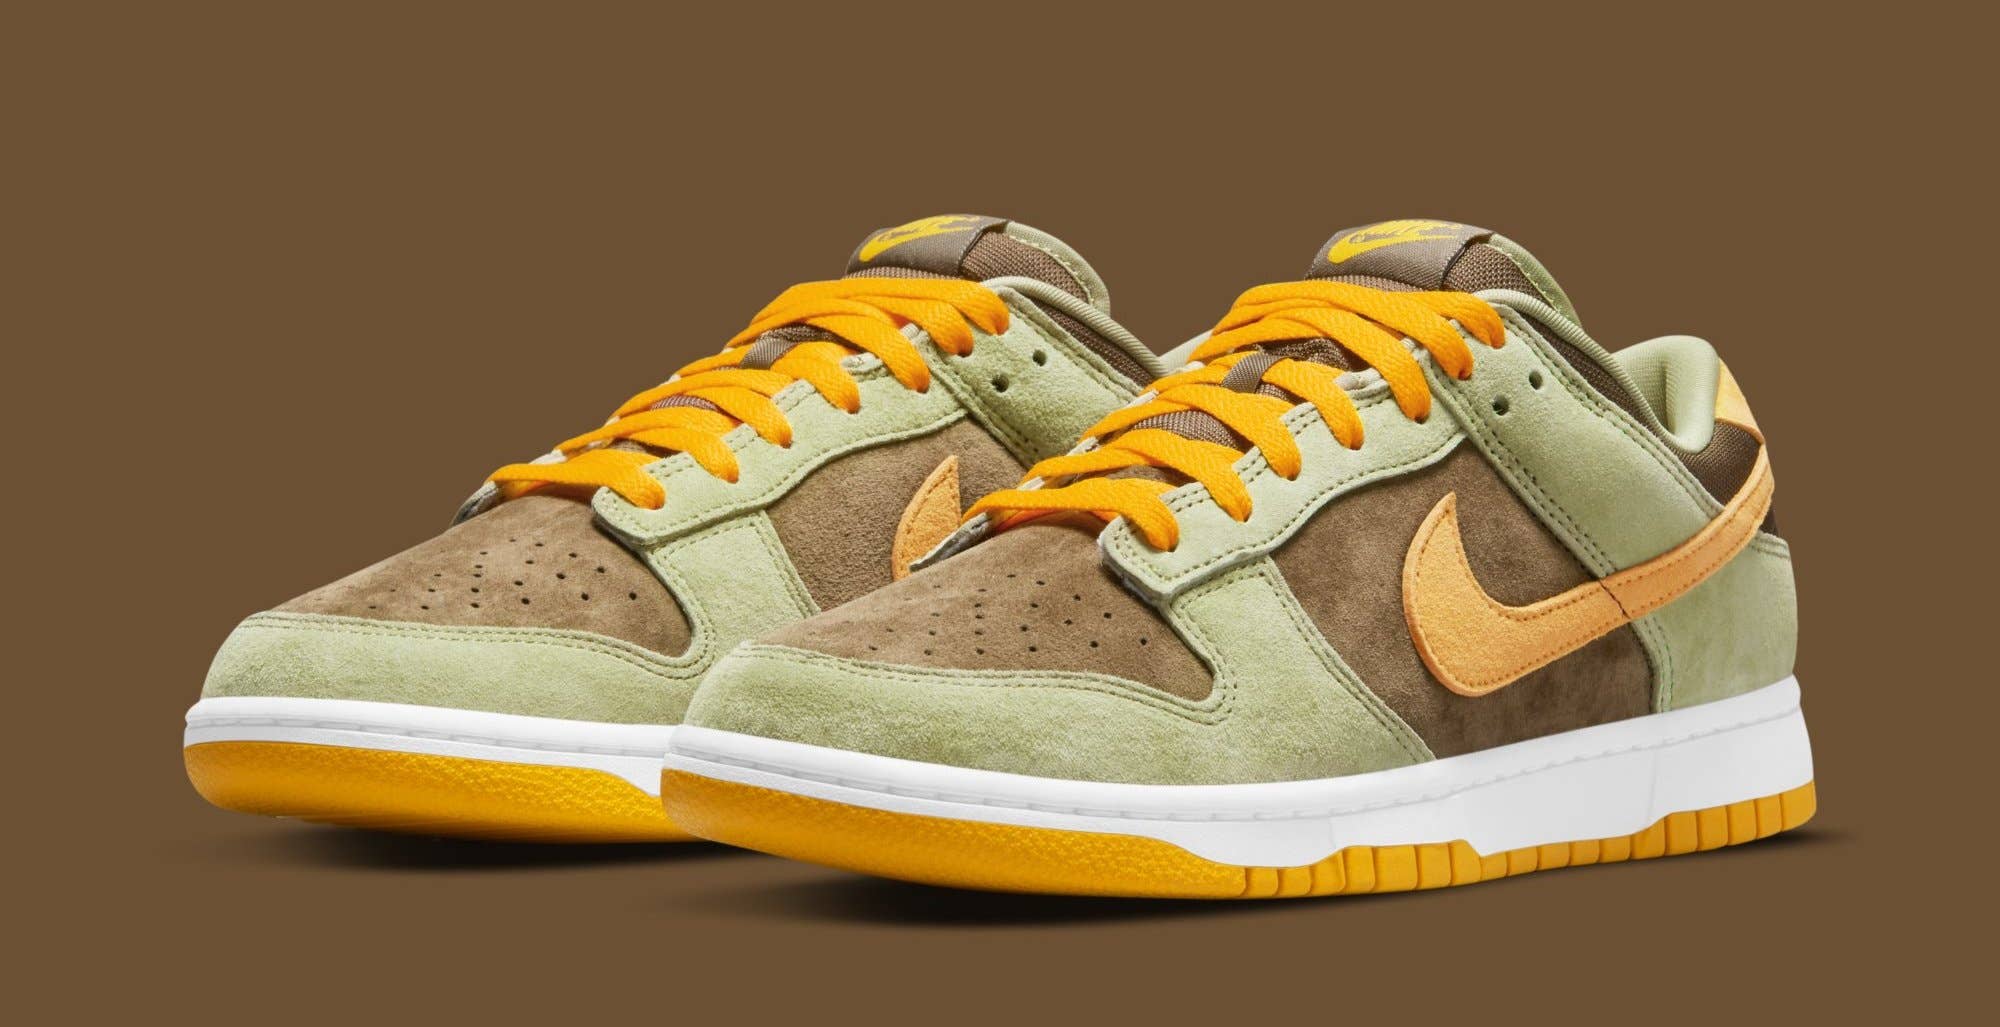 Nike Dunk Low 'Dusty Olive' DH5360-300 (Pair)